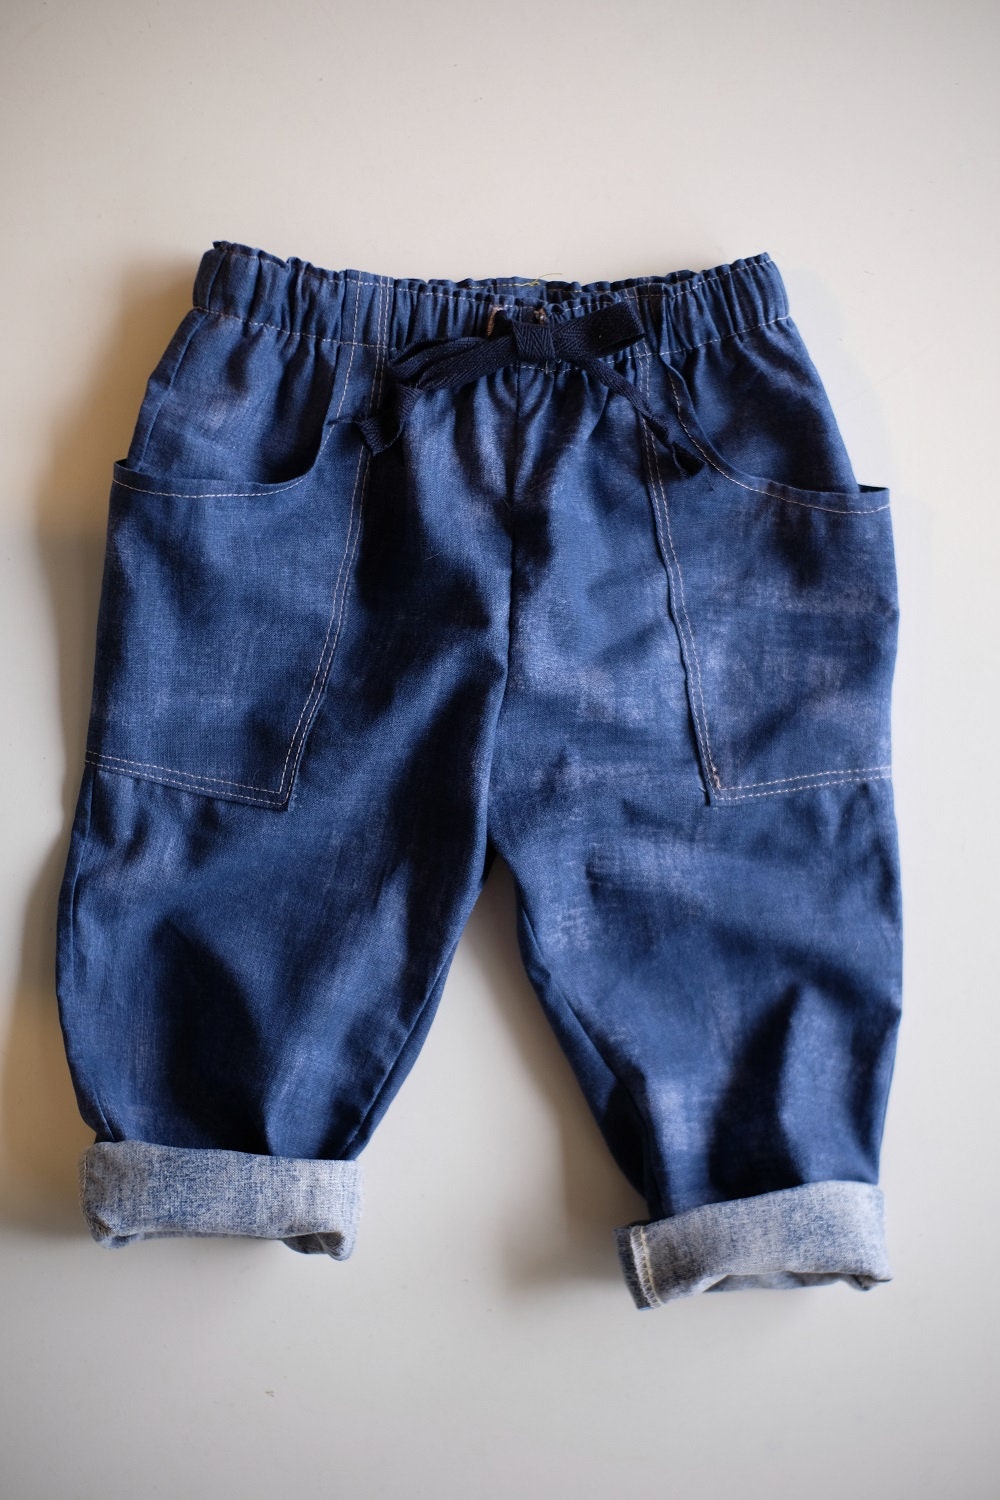 Pocket Pants PDF Pattern for Toddlers Babies Boys and Girls - Etsy